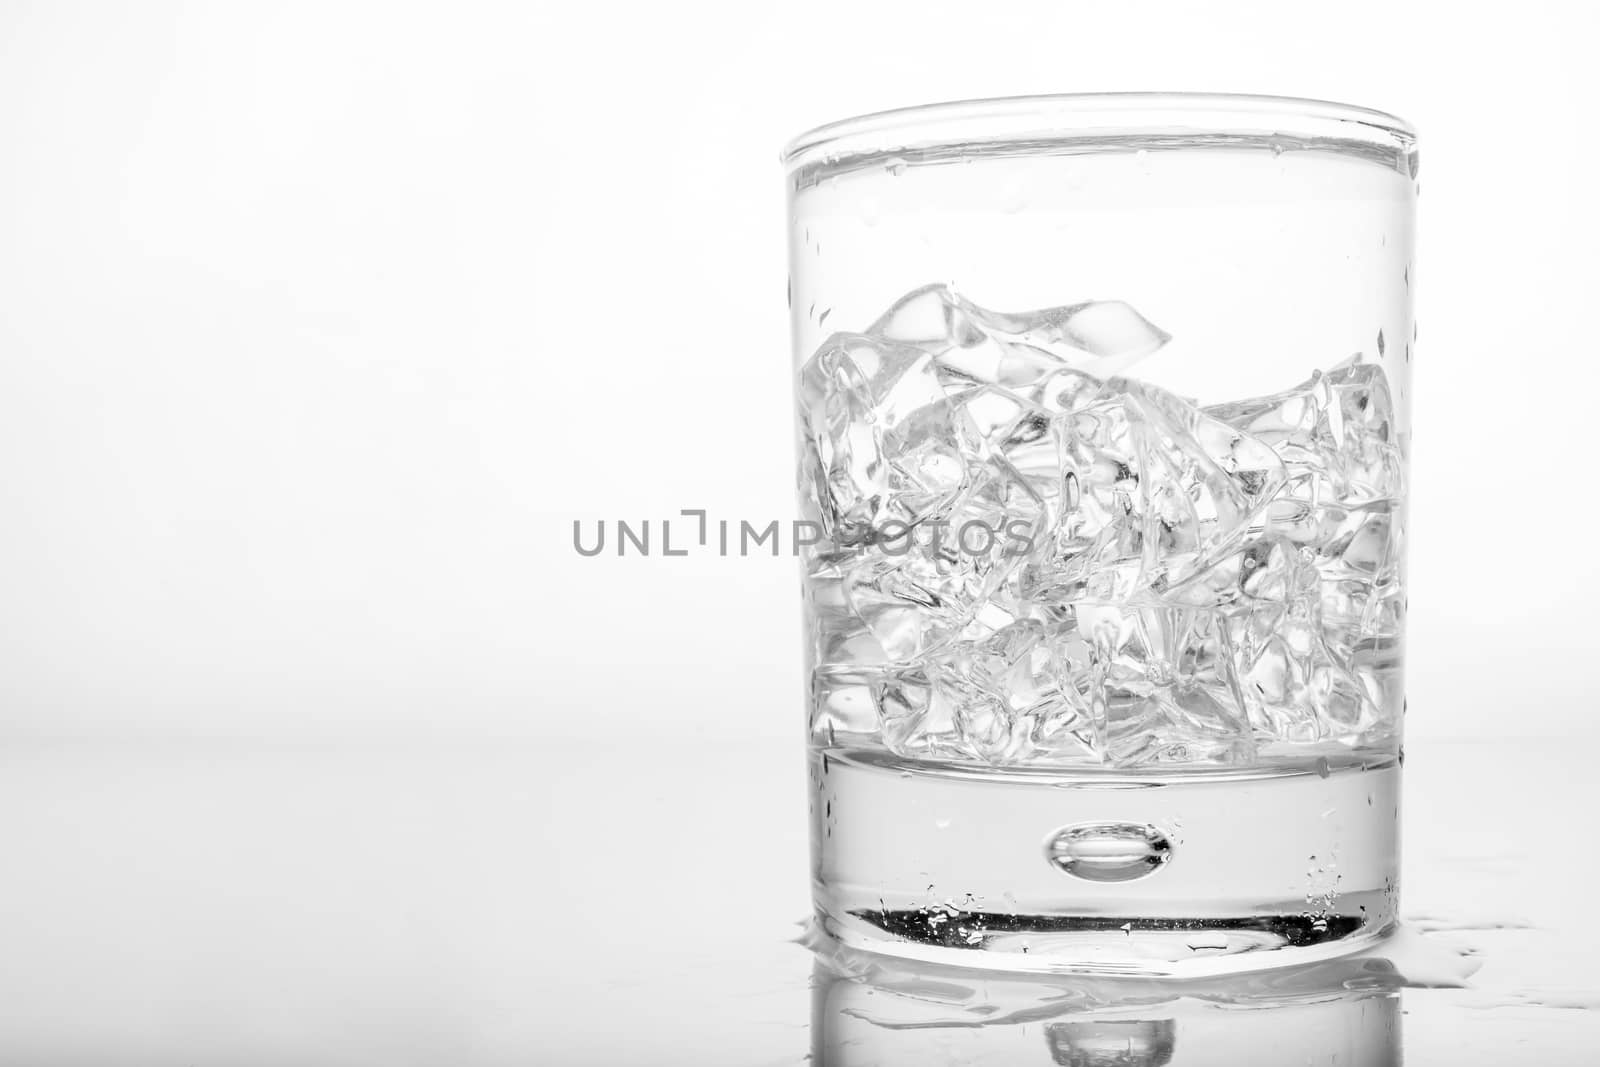 Glass of pure water with ice cubes.